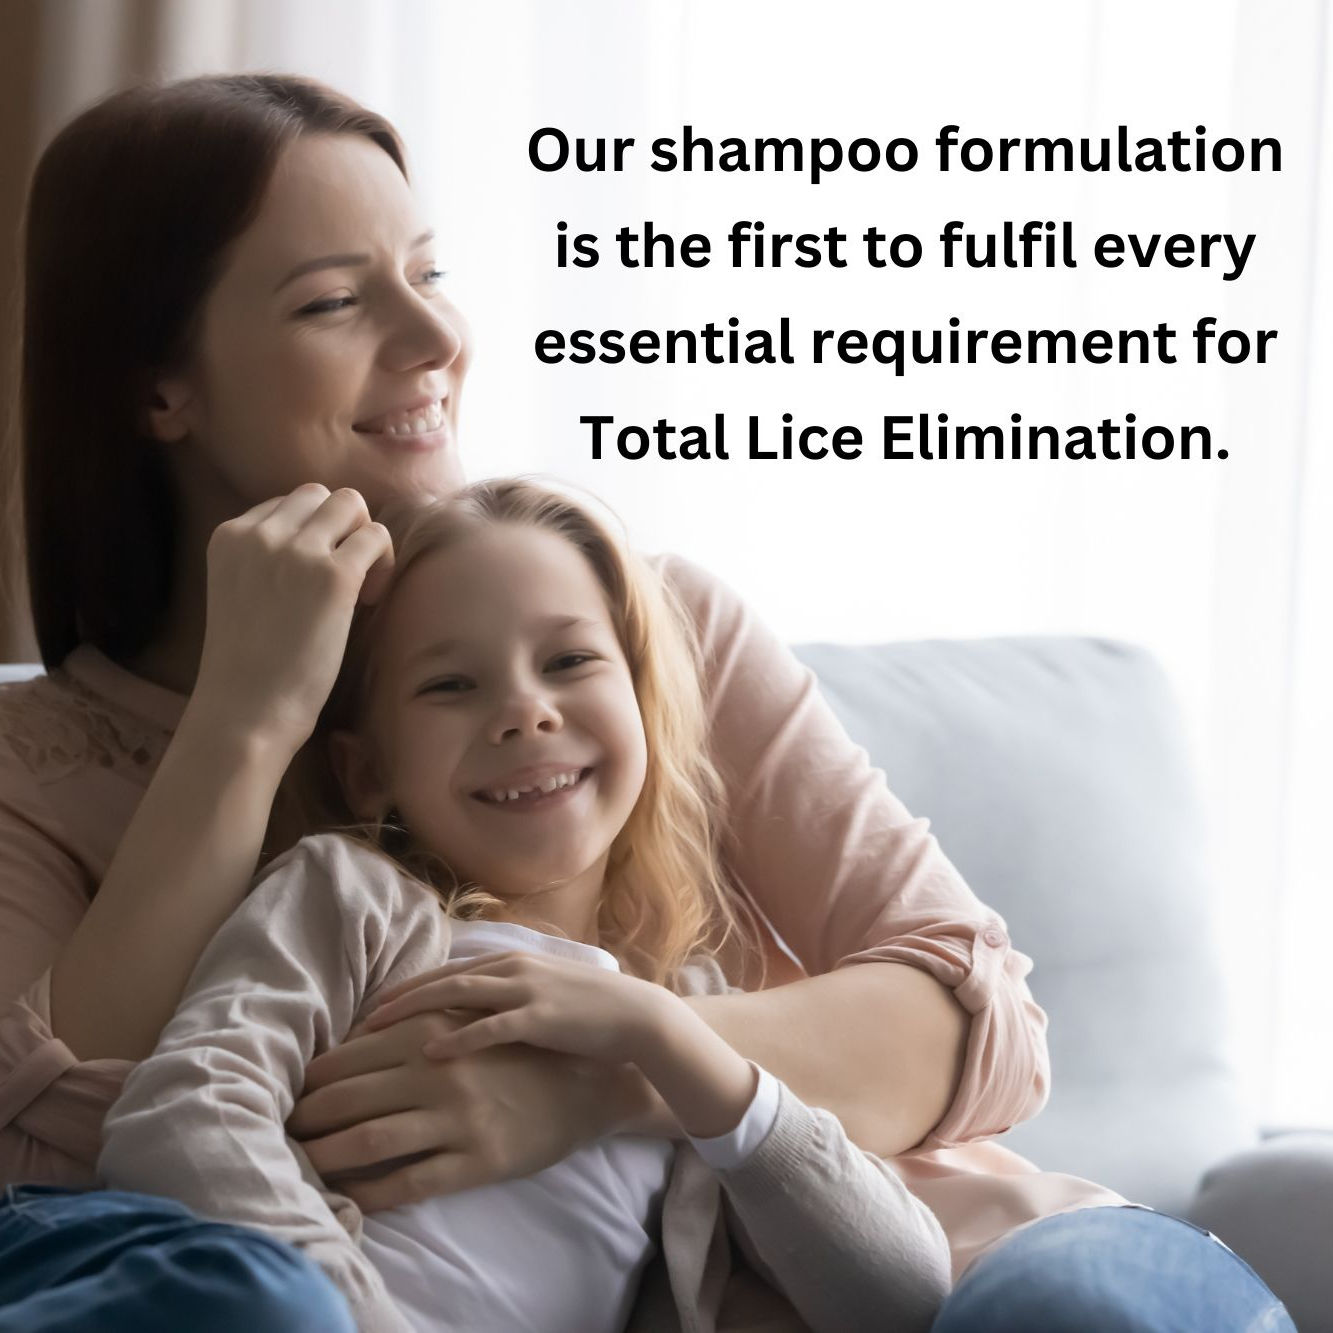 Schooltime Shampoo's formulation is the first to fulfill every essential requirement for total lice elimination!